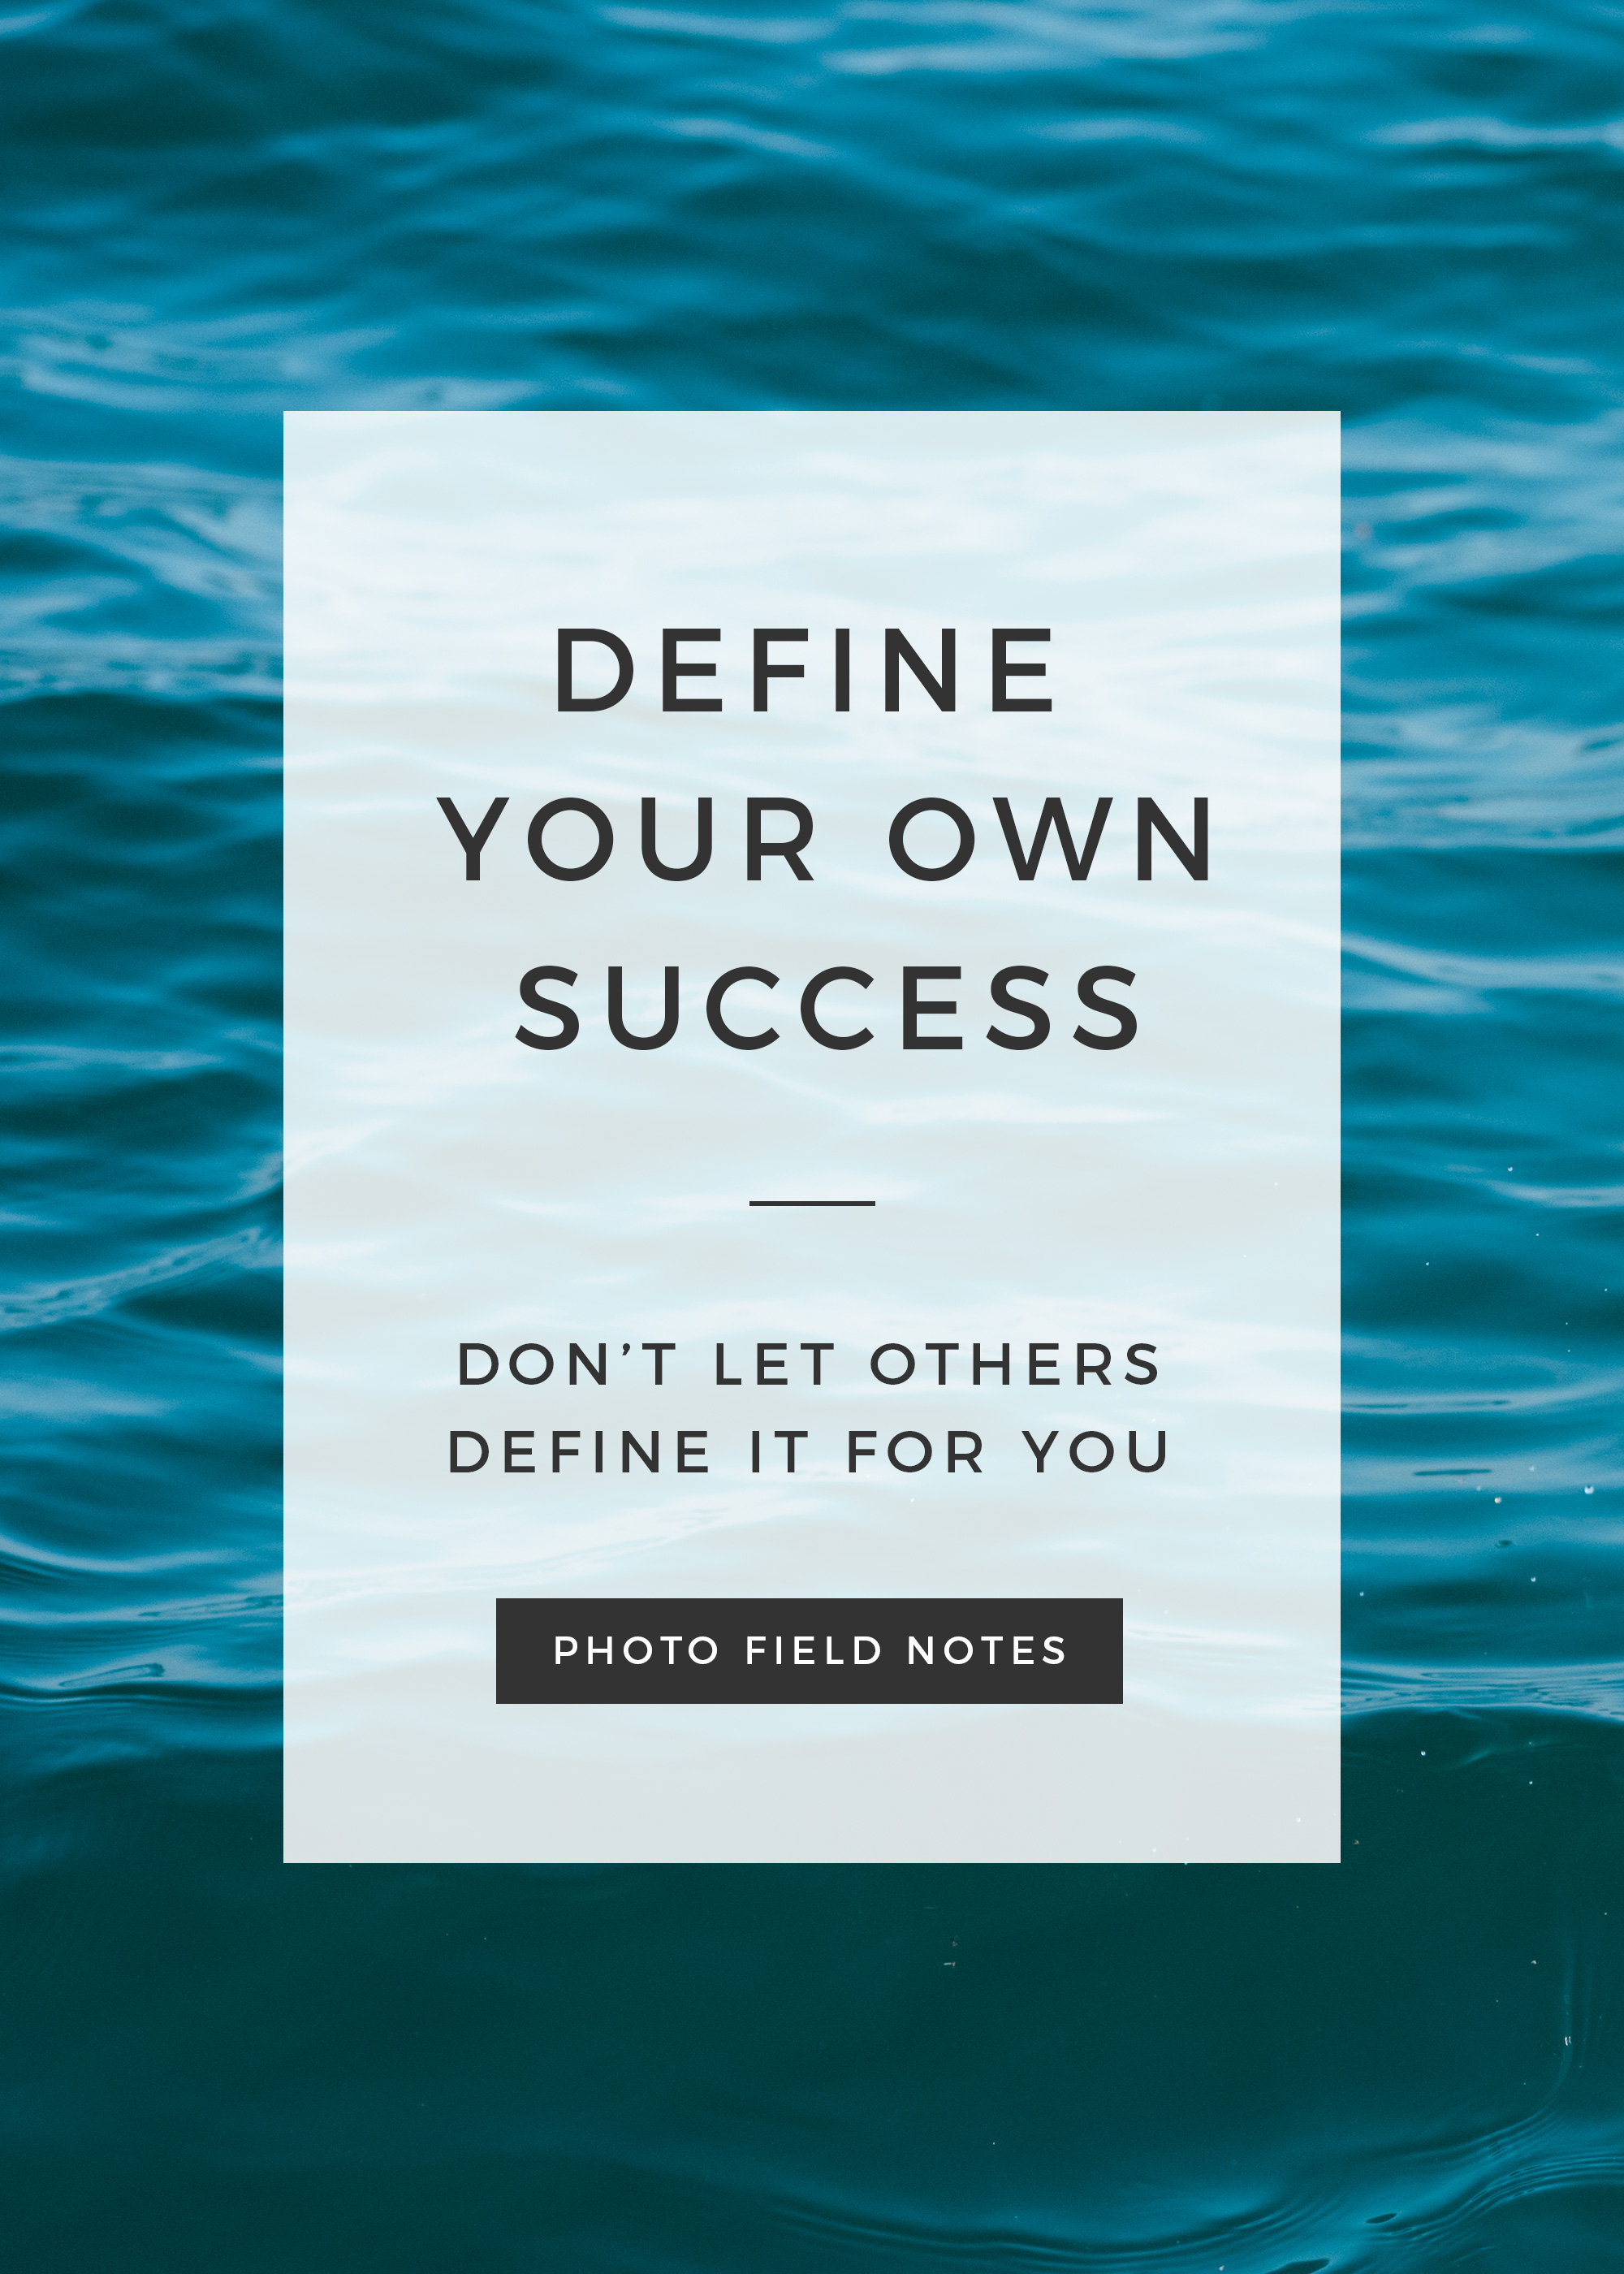 Define your own success - don't let others define it for you (Photo Field Notes Podcast, career advice for photographers)